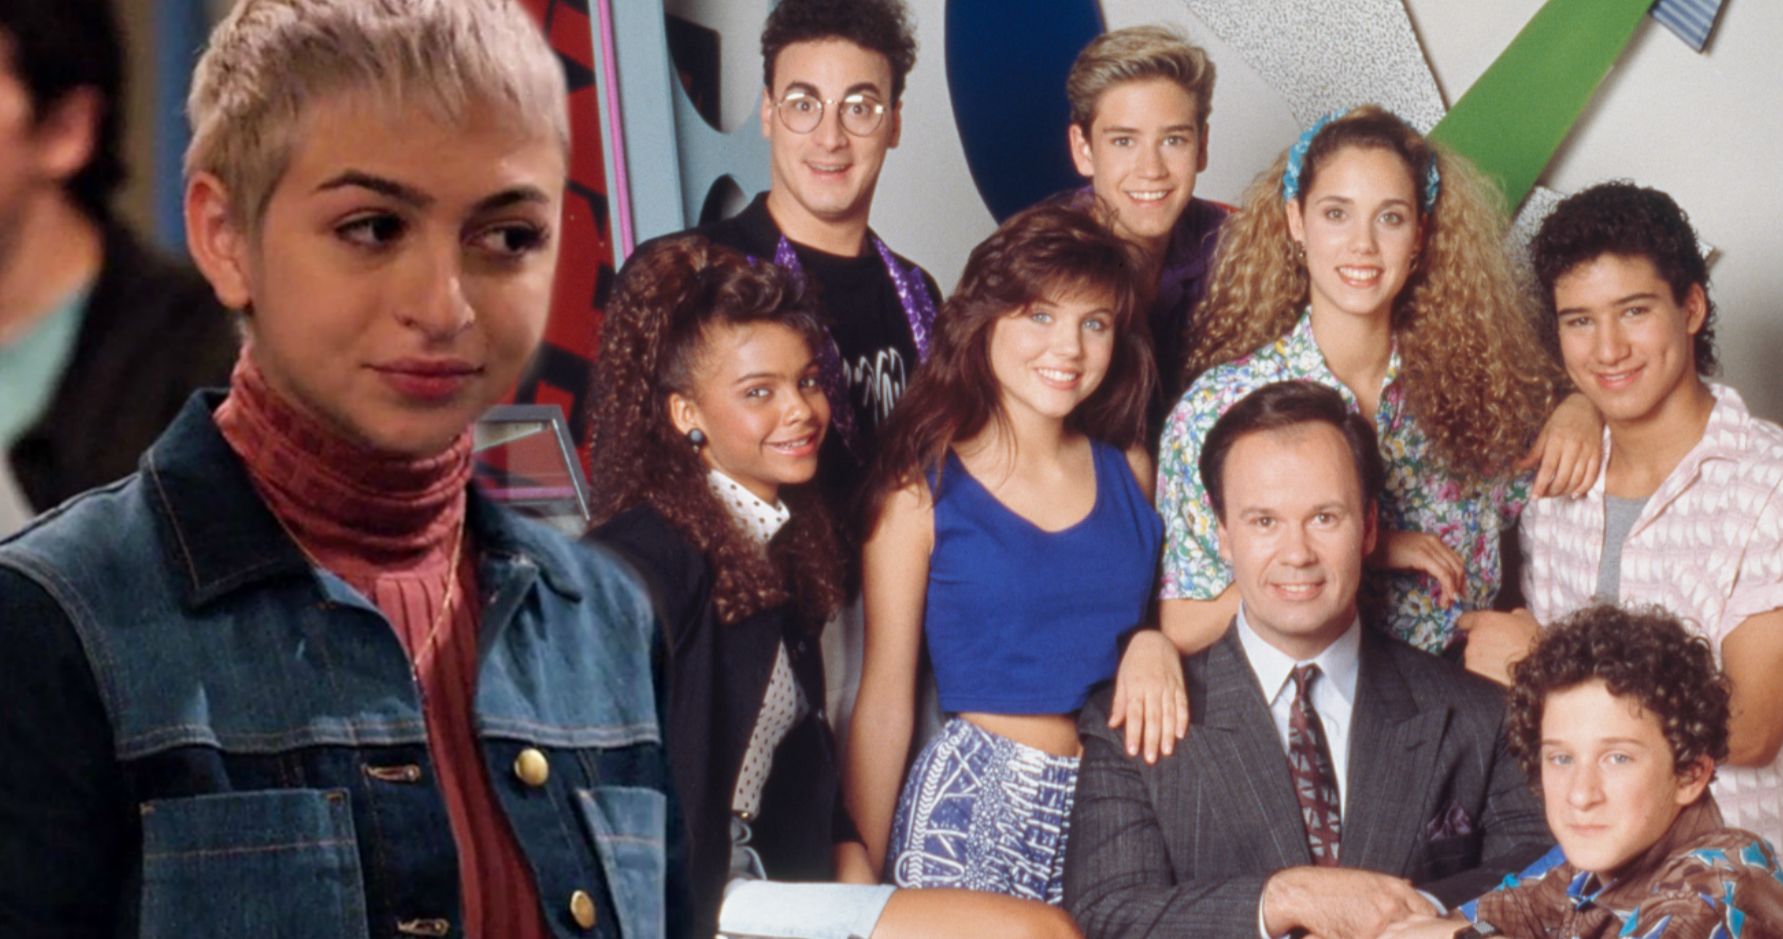 Saved by the Bell Revival Finds New Bayside Lead in Josie Totah